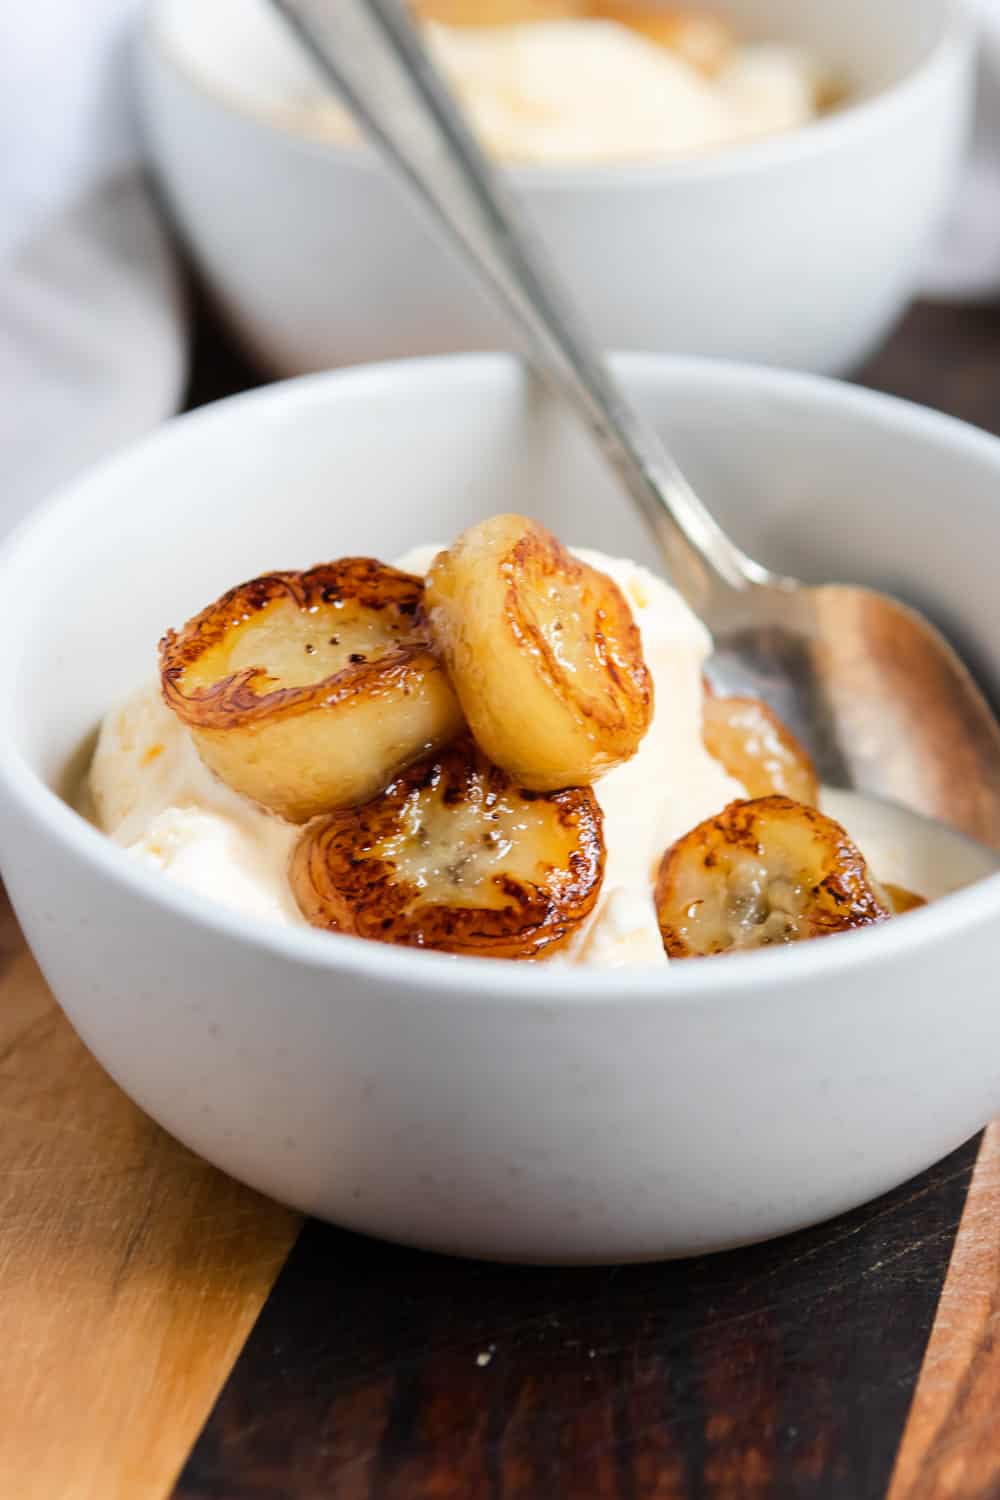 Fried bananas in bowl with vanilla ice cream and spoon.